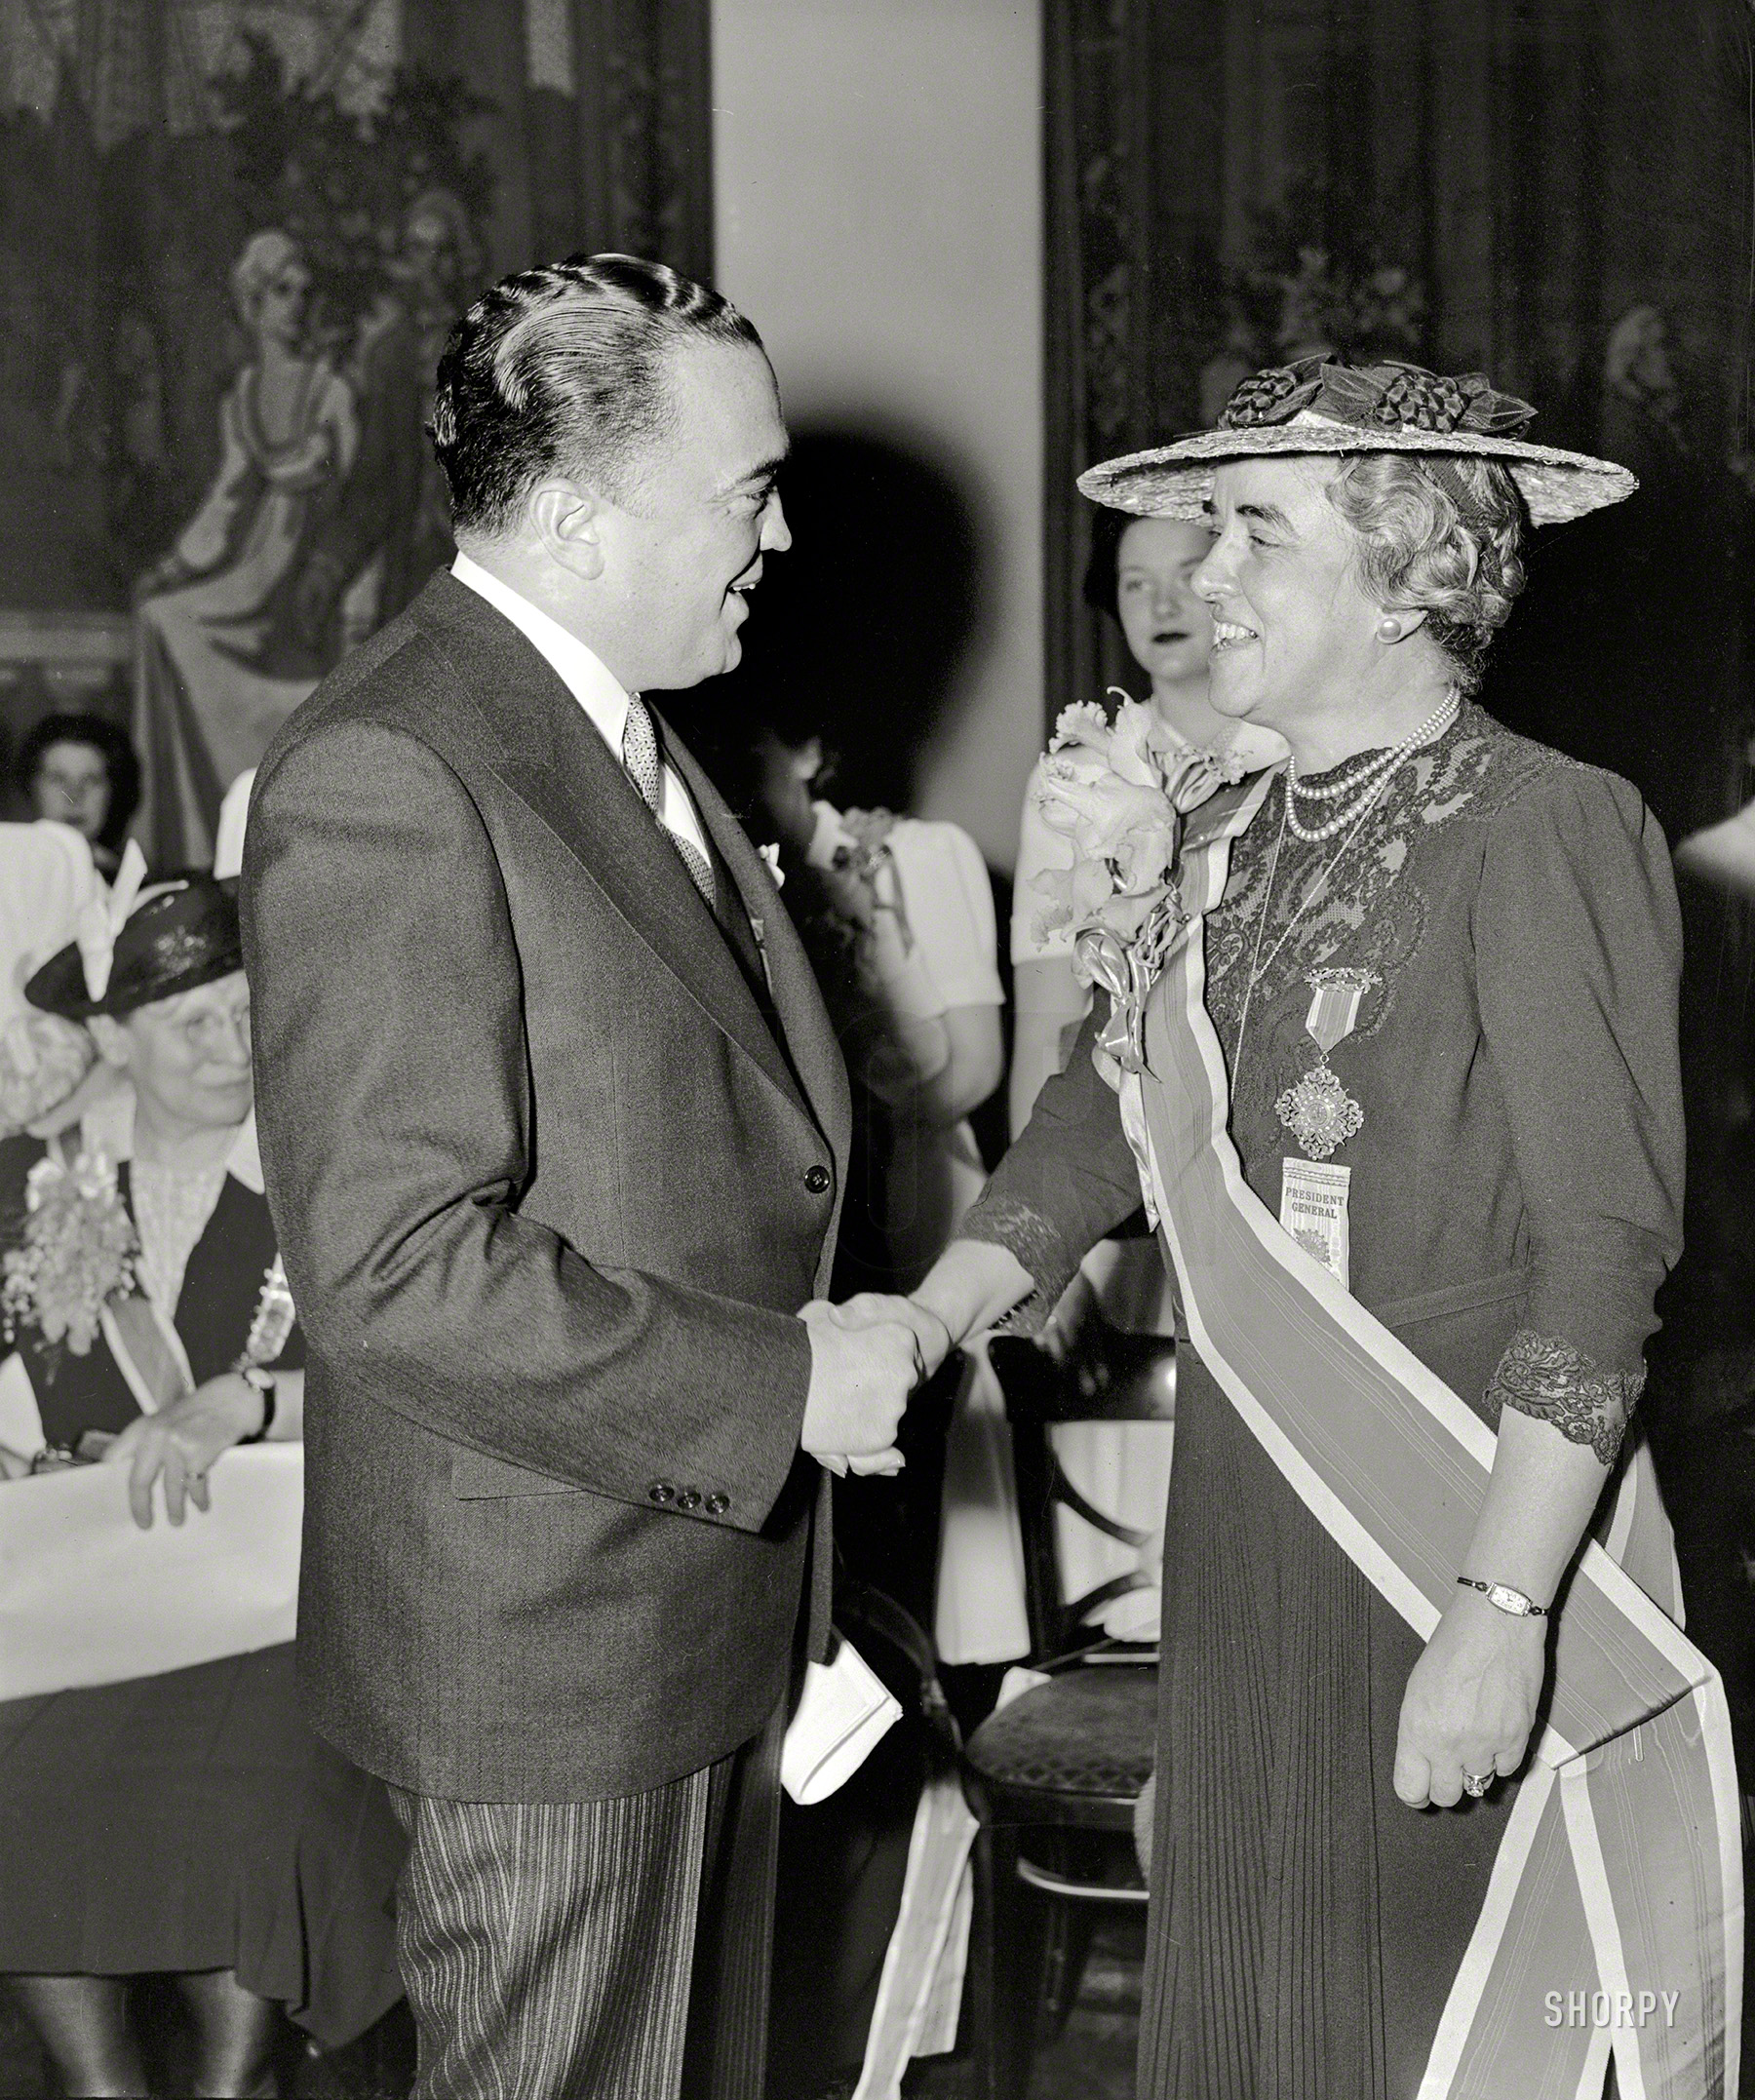 Washington, D.C., 1940. "Daughters of the American Revolution reception. J. Edgar Hoover, Federal Bureau of Investigation director, greets Mrs. Henry M. Robert Jr., President General of the D.A.R." View full size.